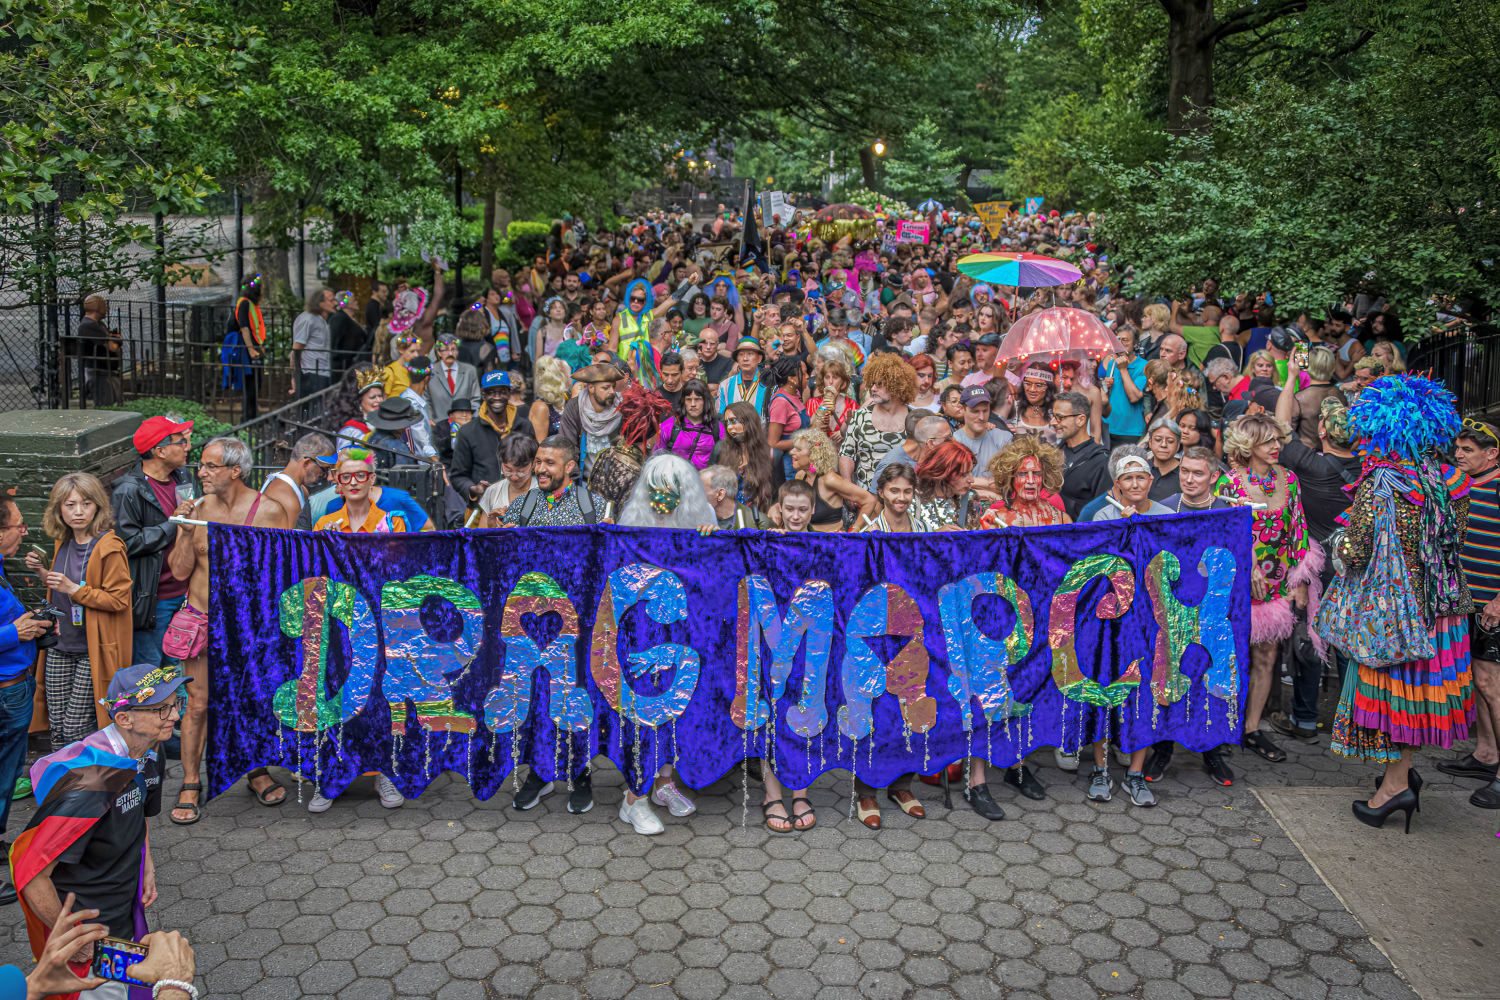 "We're Coming for Your Children" chant at NYC Drag March sparks outrage